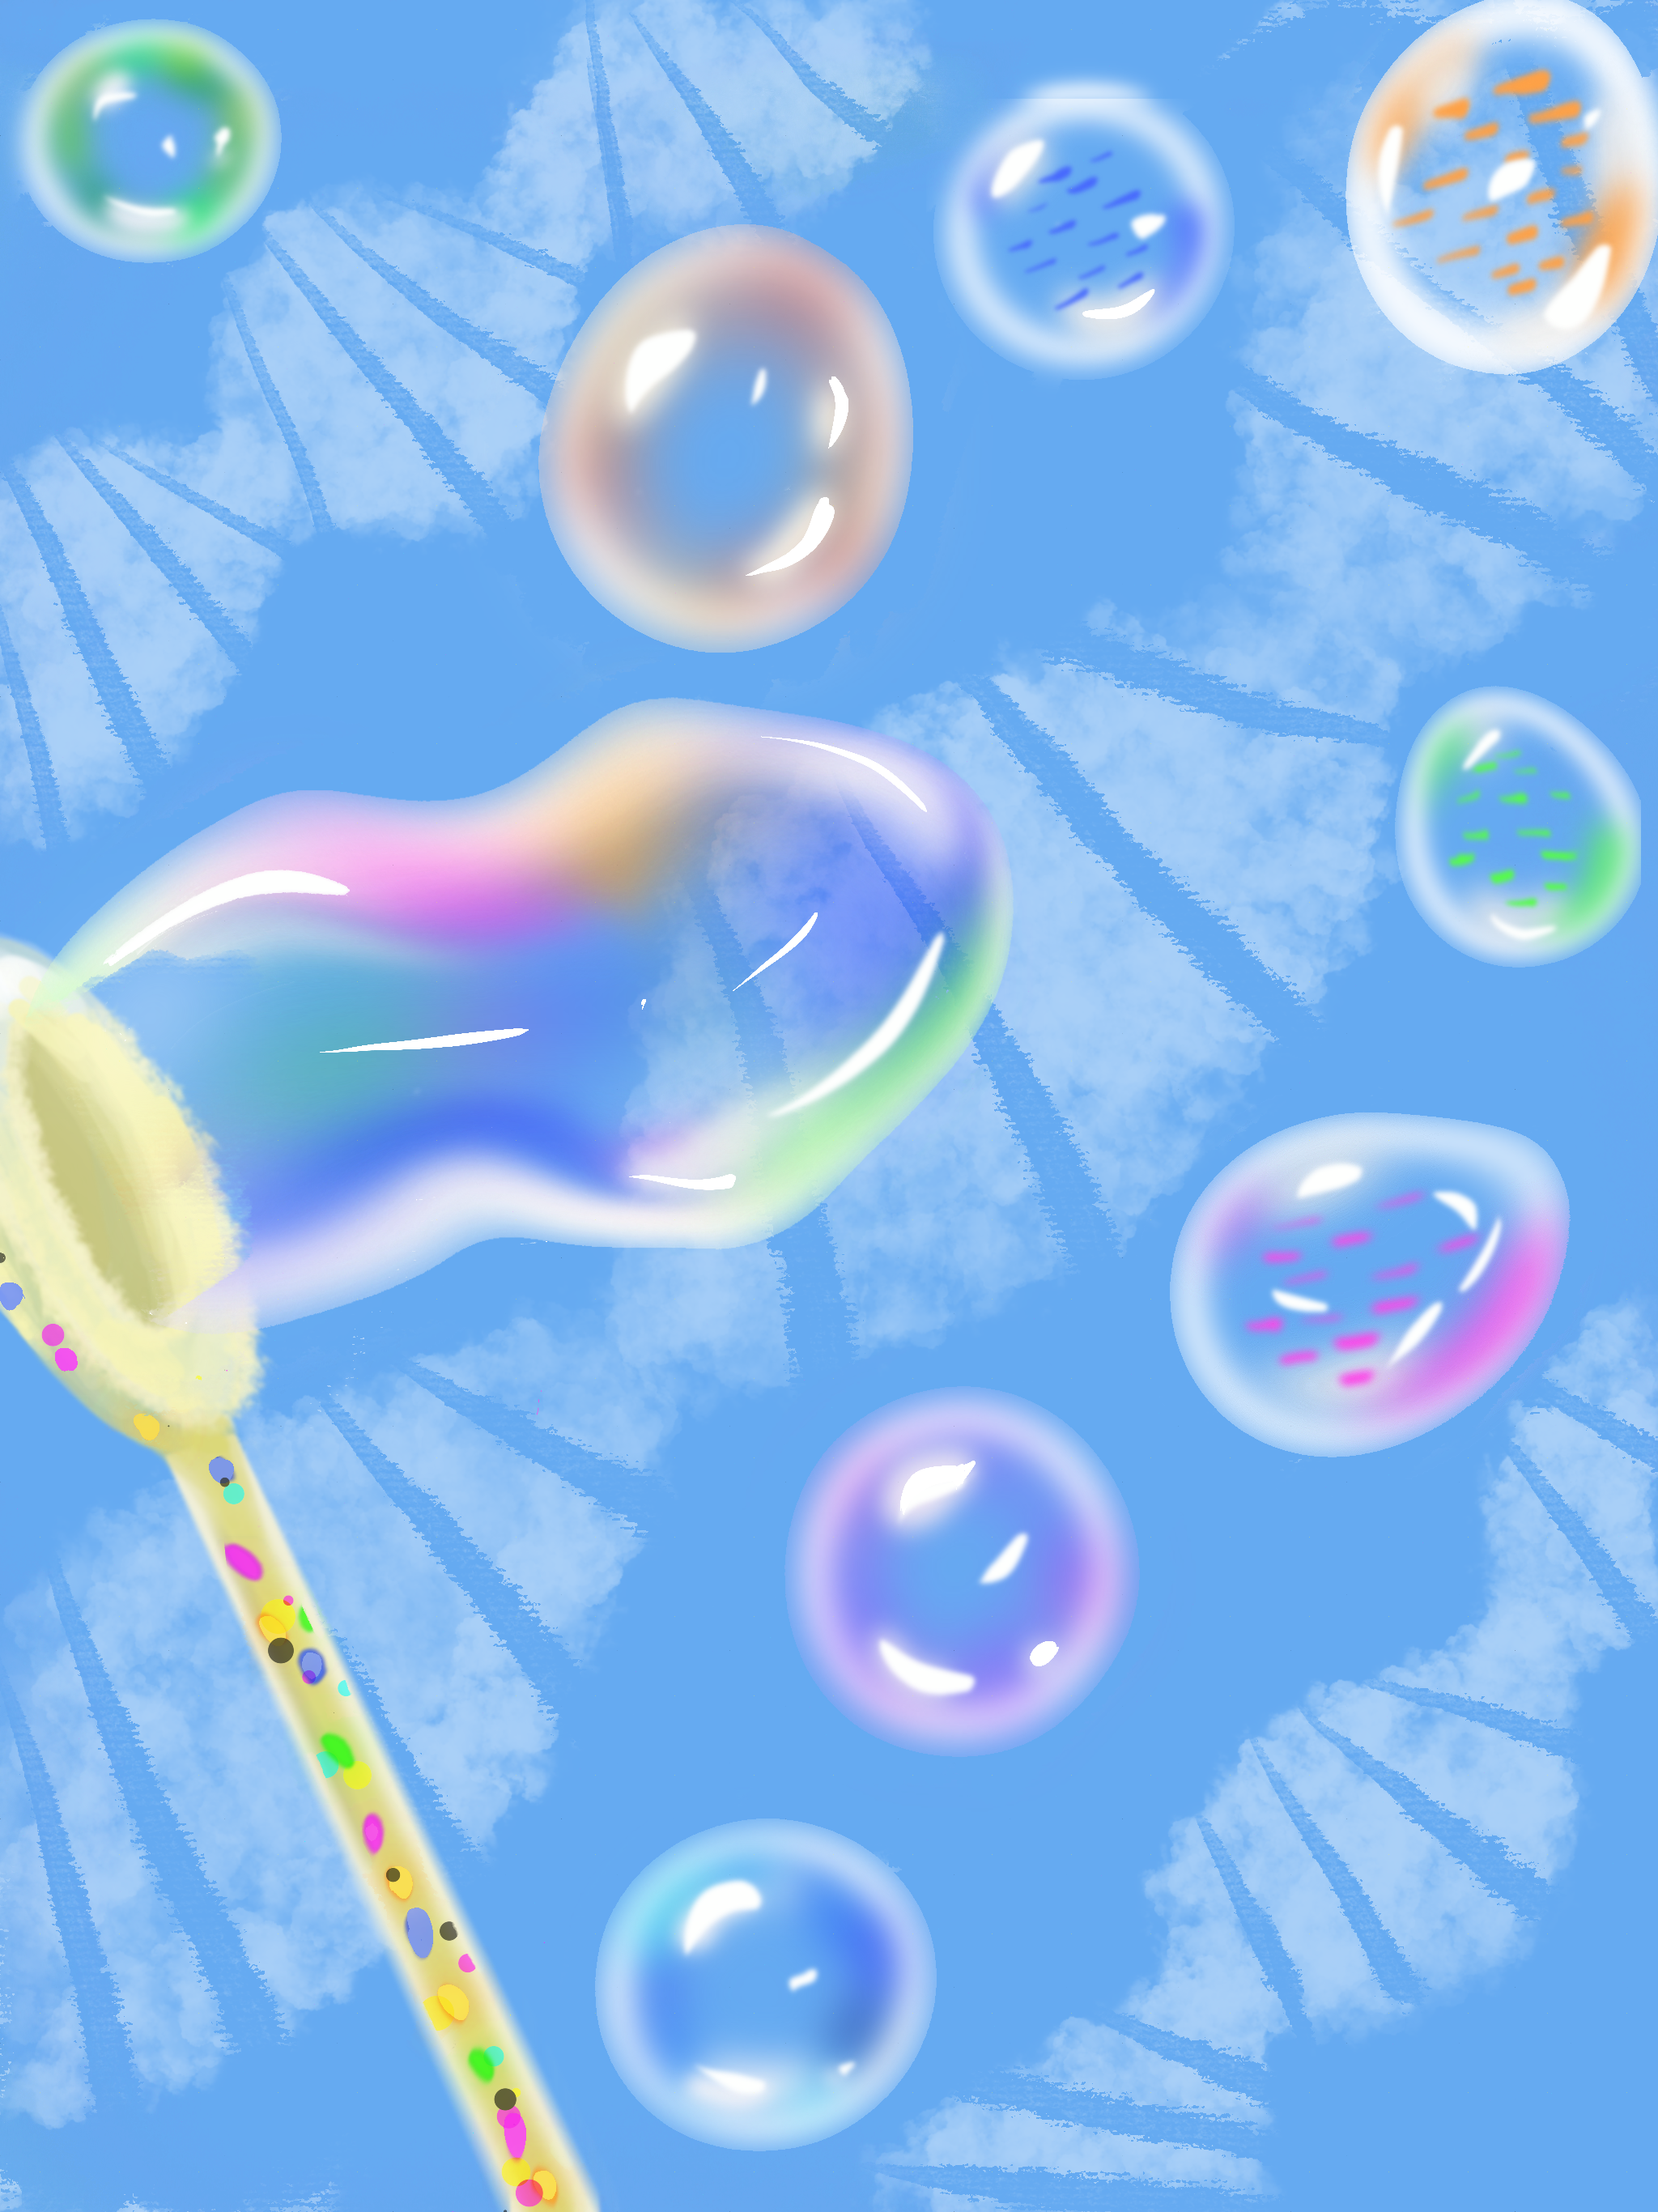 Droplet-based sequencing/blowing bubbles